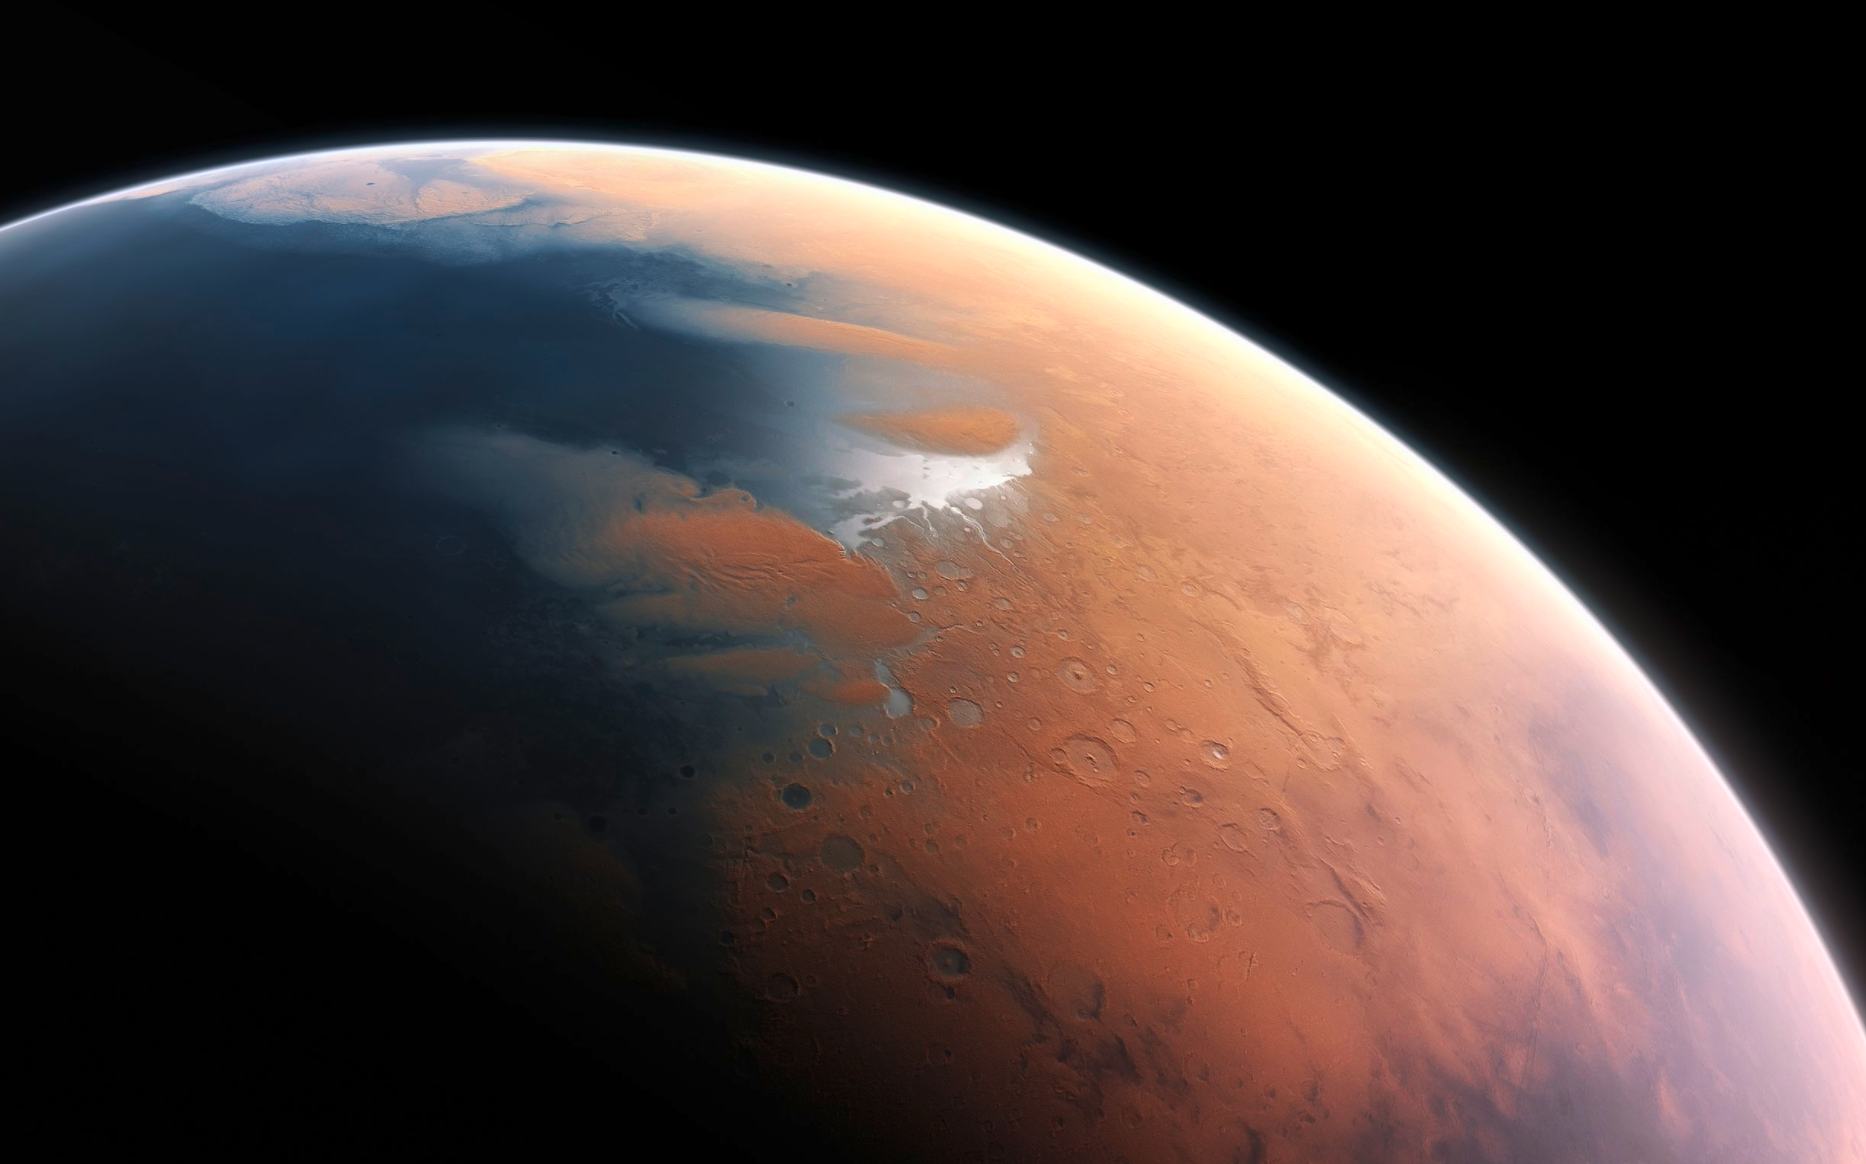 An artists’ impression of what Mars may have looked like about 4 billion years ago, with enough water to cover the planet’s surface to about 140 metres deep (Source: European Southern Observatory)